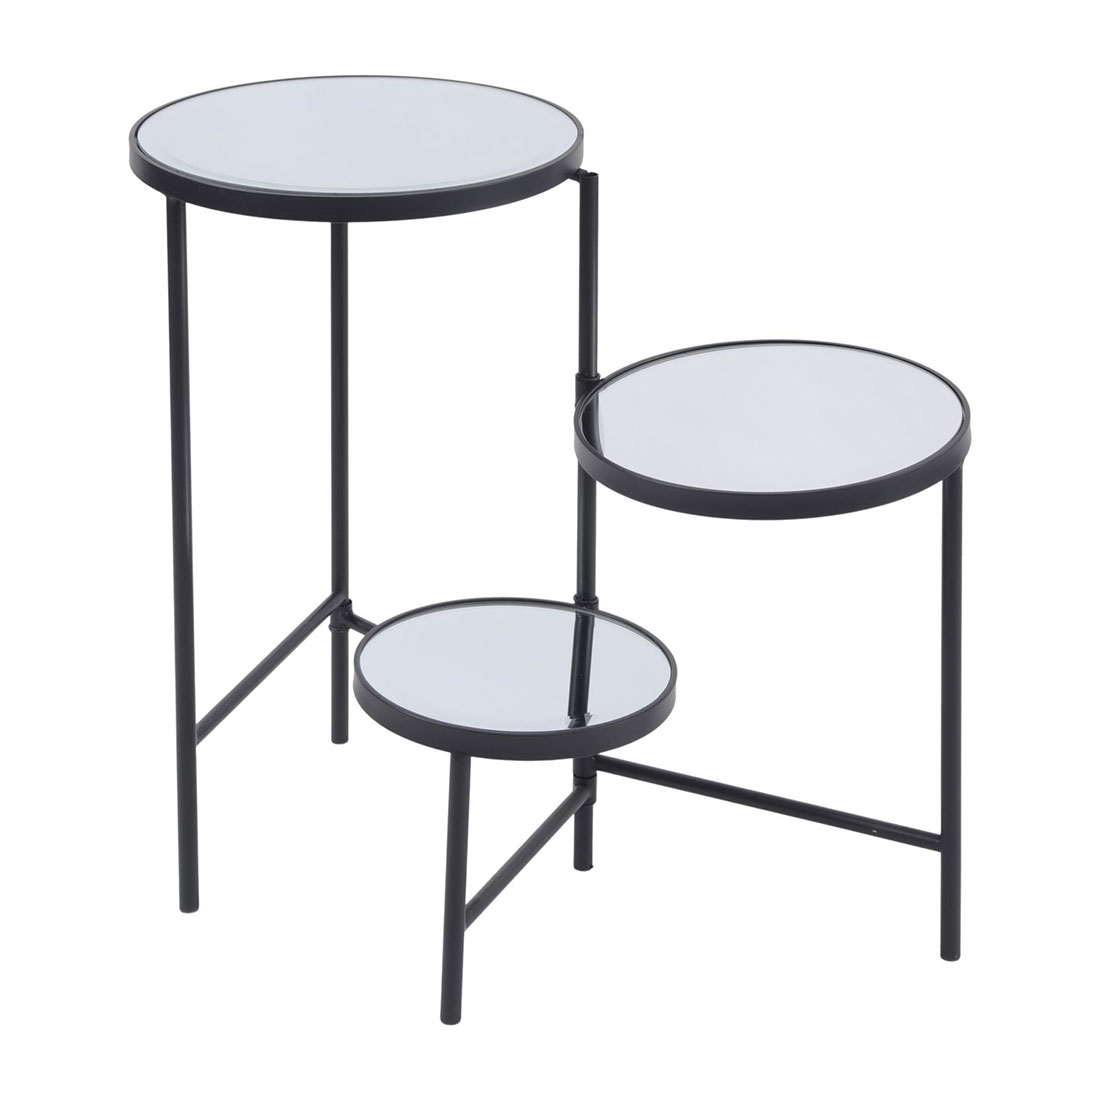 Three Tiered Circular Black Side Table - Surround